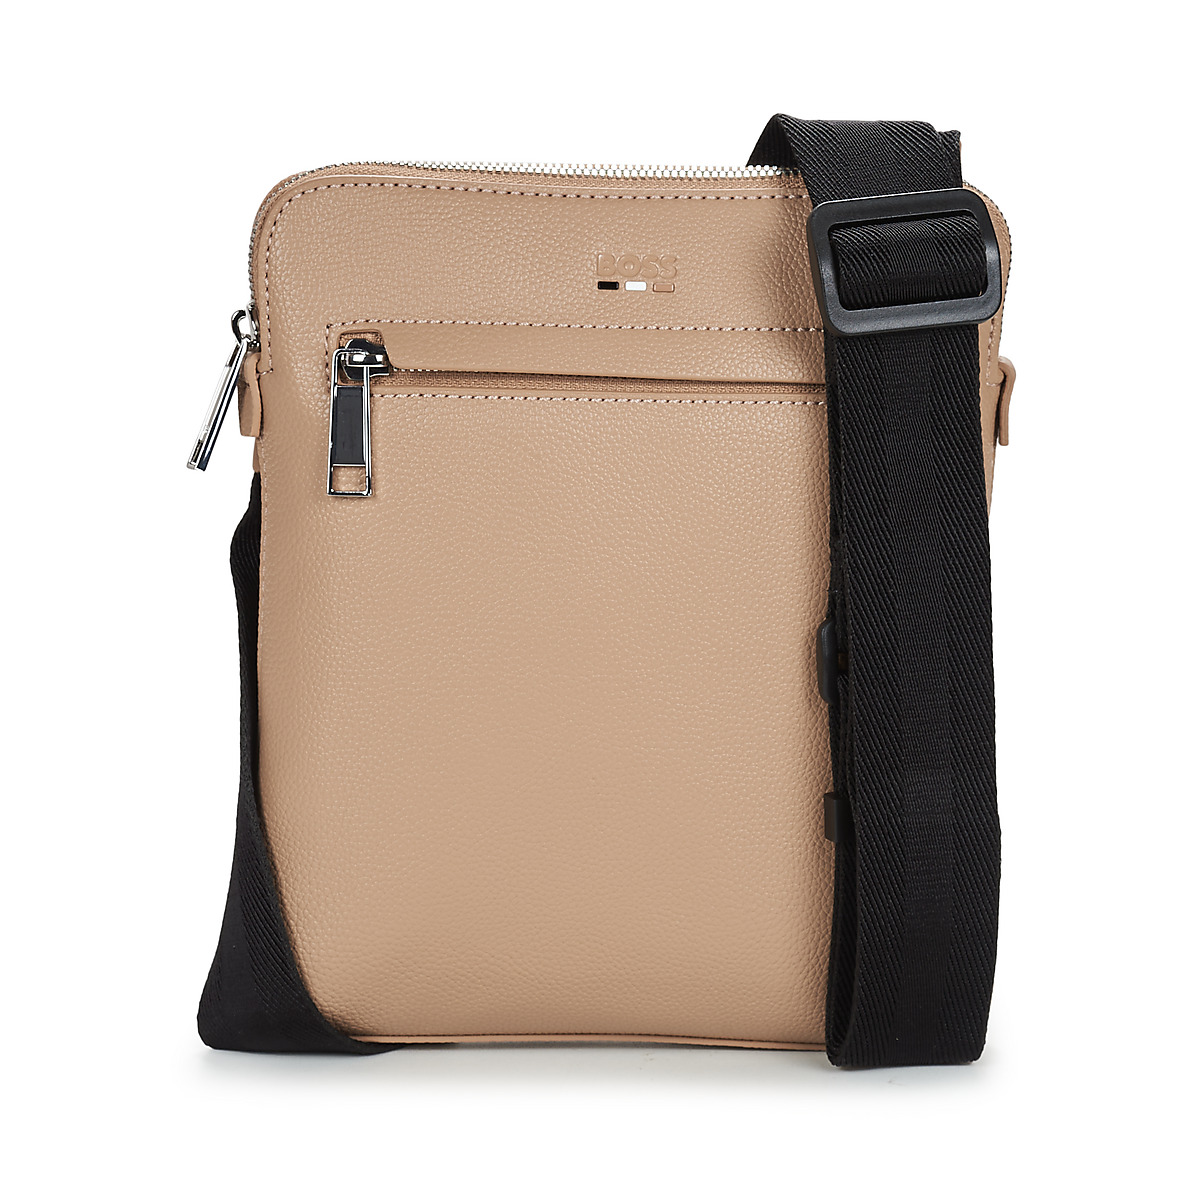 BOSS Ray_S zip Free / env Beige - - ! Delivery Pouches with Clutches Rubbersole.co.uk Bags £ Men